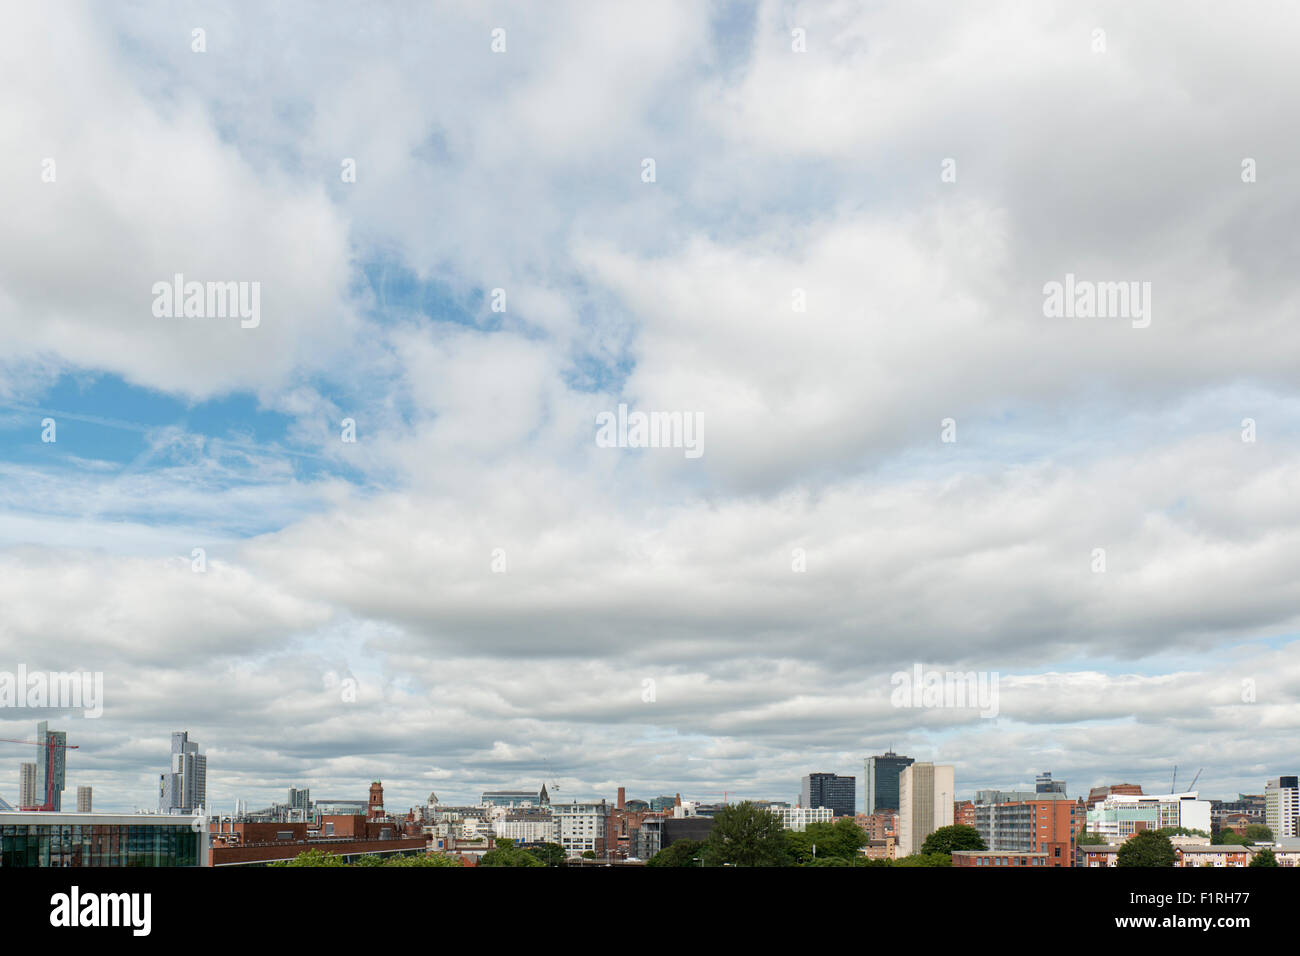 A shot of the city skyline of Manchester, UK, featuring various tall buildings and skyscrapers. Stock Photo